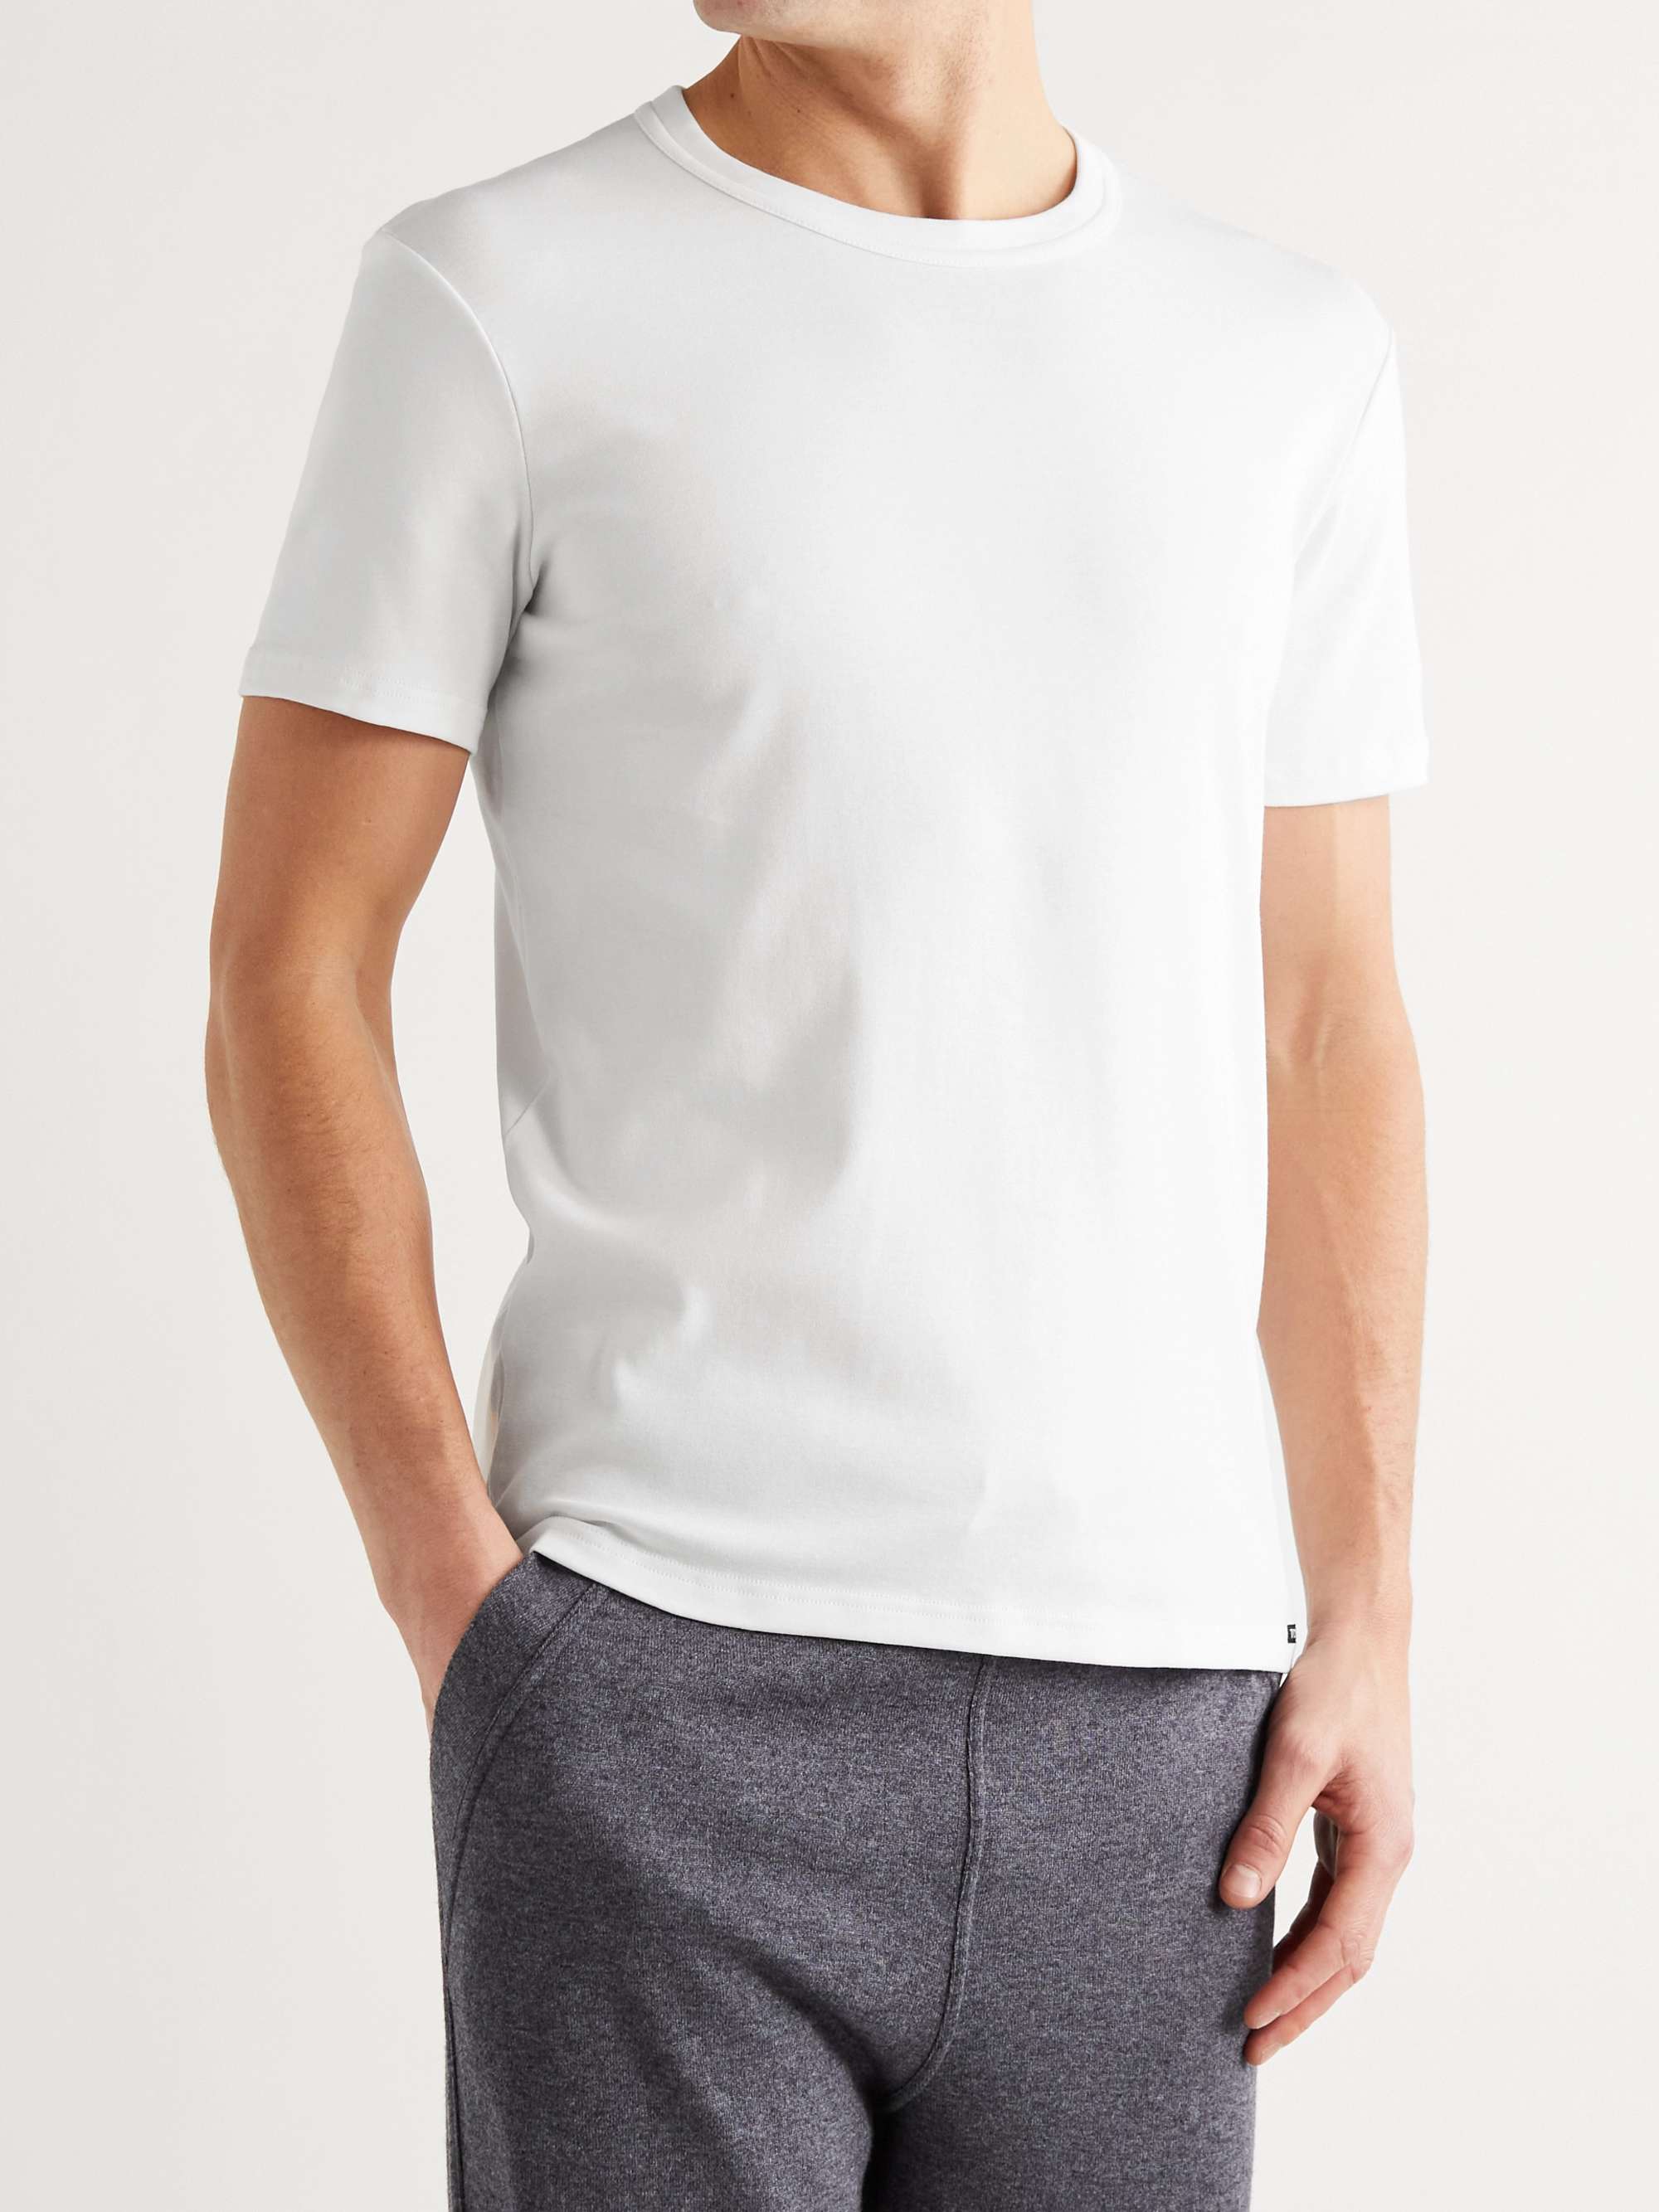 Mens Clothing T-shirts Long-sleeve t-shirts Tom Ford Stretch Cotton And Modal-blend T-shirt in White for Men 